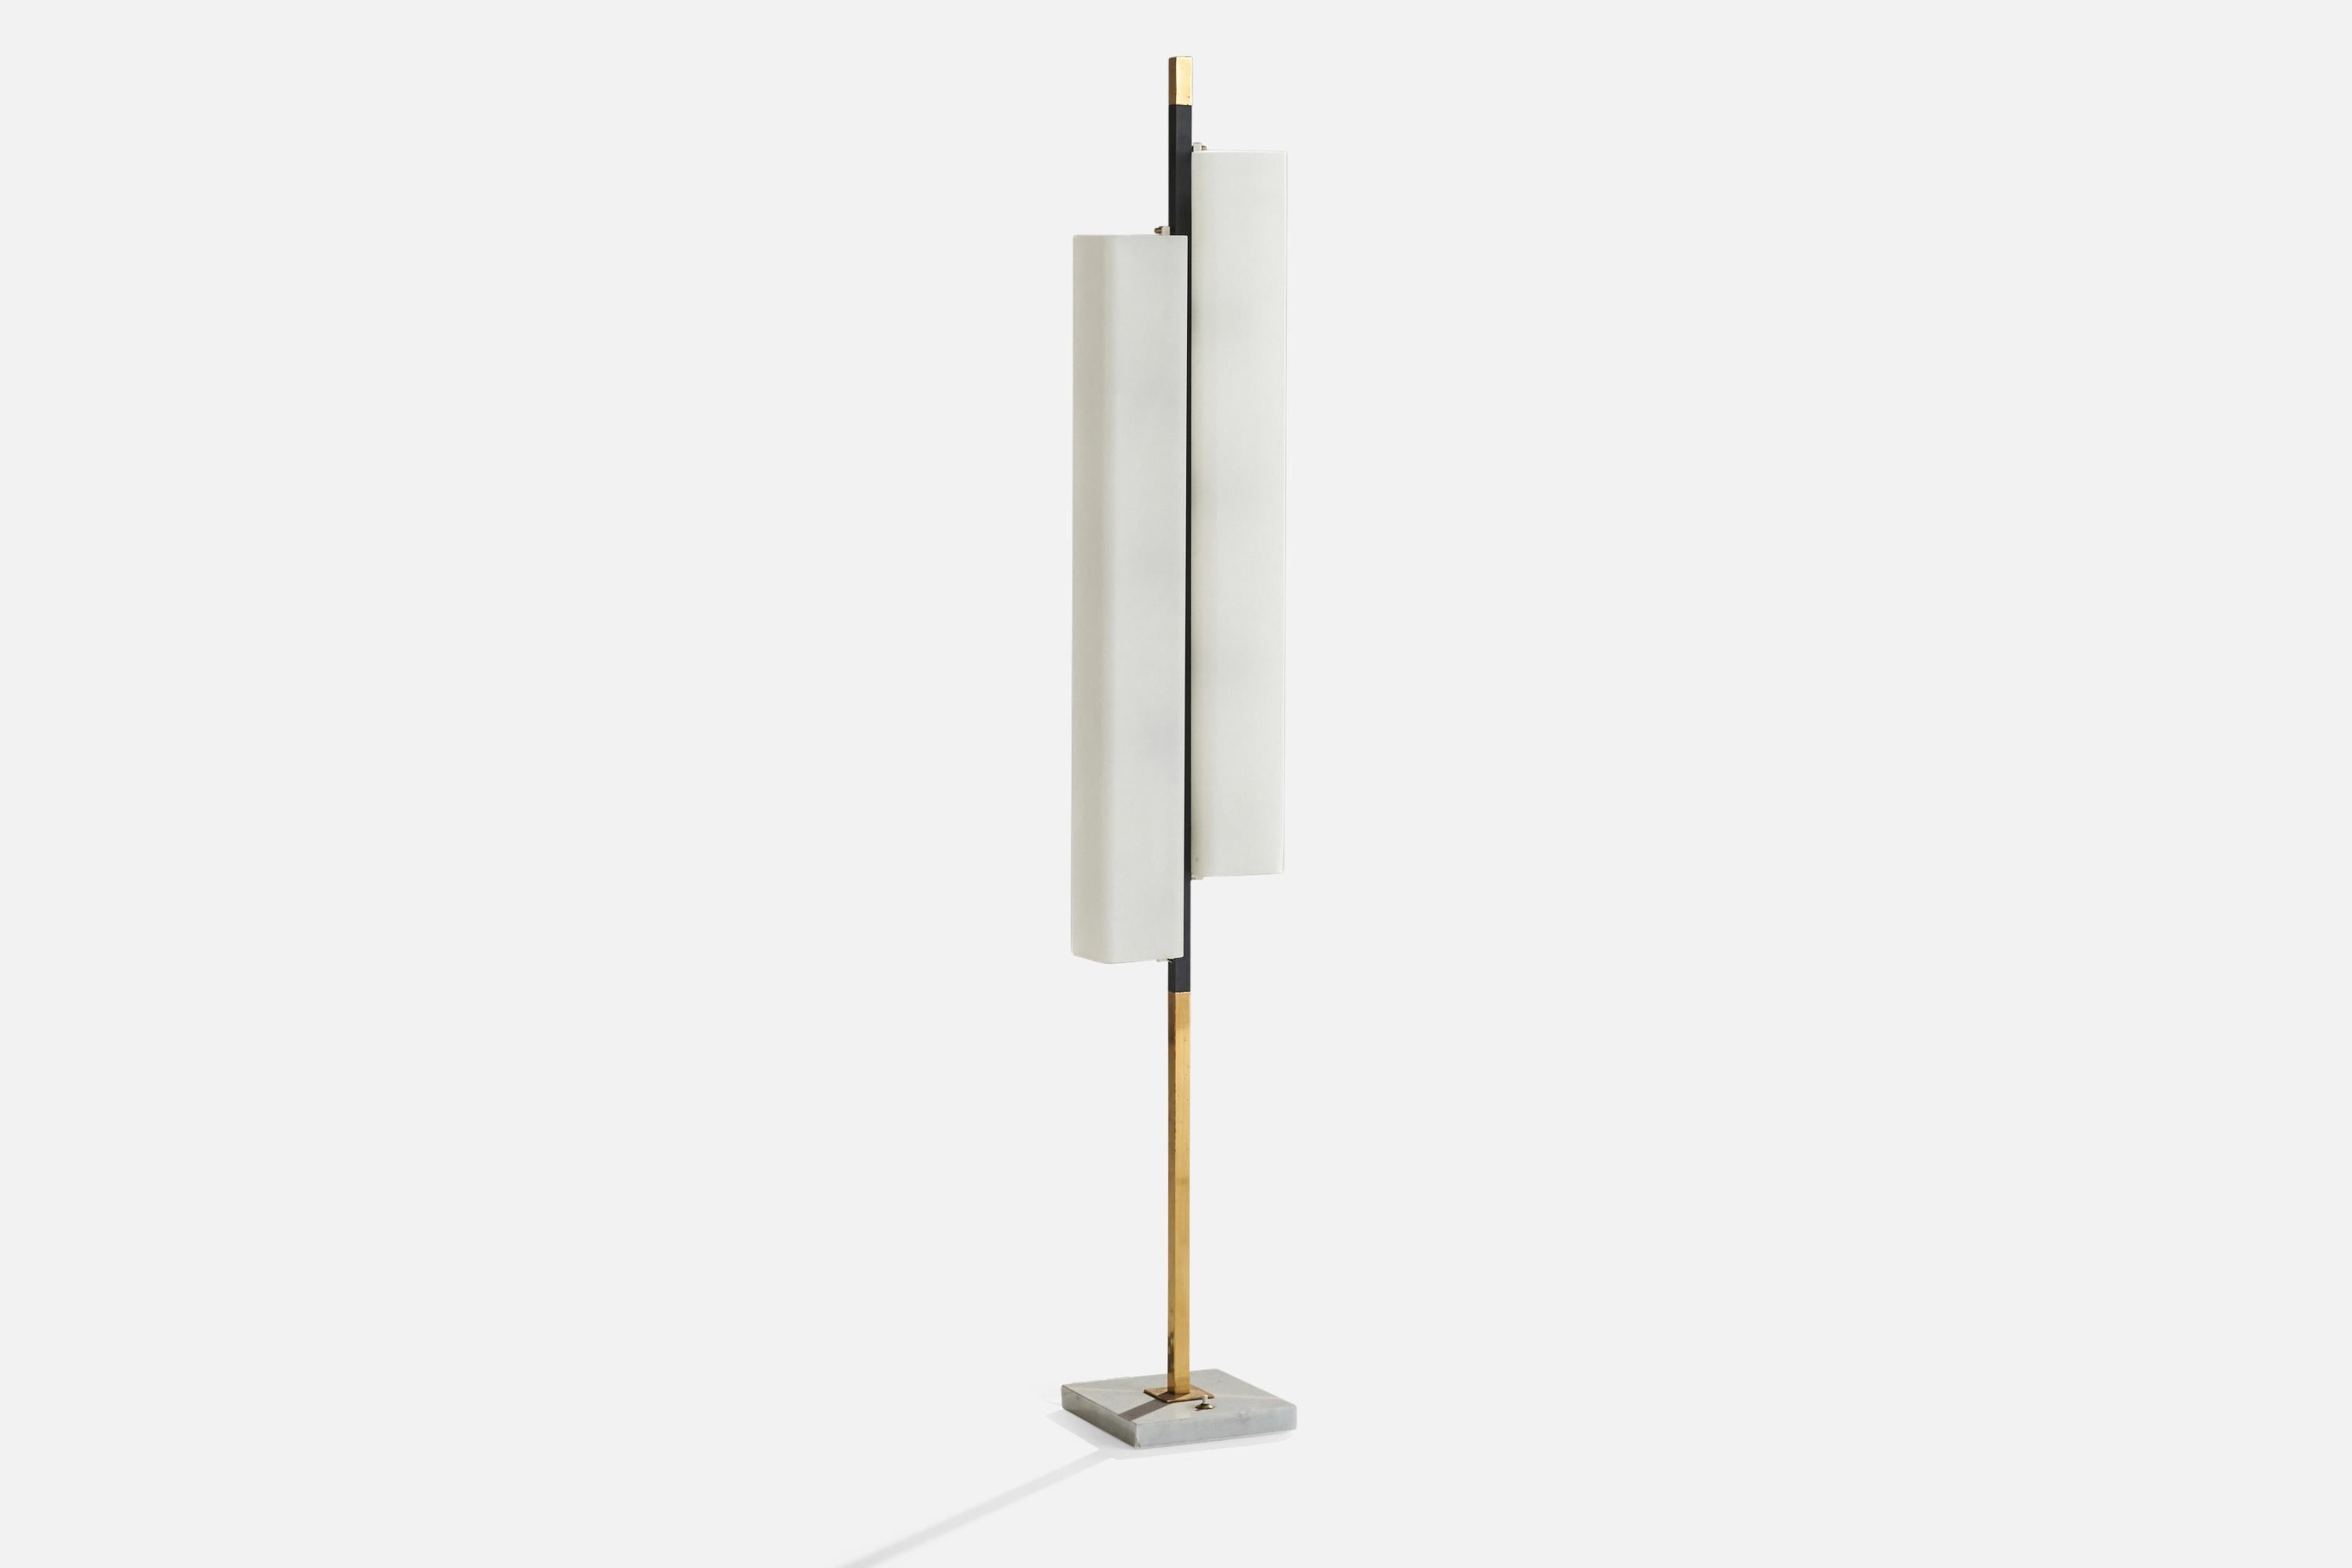 A brass, metal, marble and glass floor lamp designed and produced by Stilnovo, Italy, c. 1960s.

Overall Dimensions (inches): 59.25” H x 9” W x 8”  D
Stated dimensions include shade.
Bulb Specifications: E-14 Bulbs
Number of Sockets: 8
All lighting